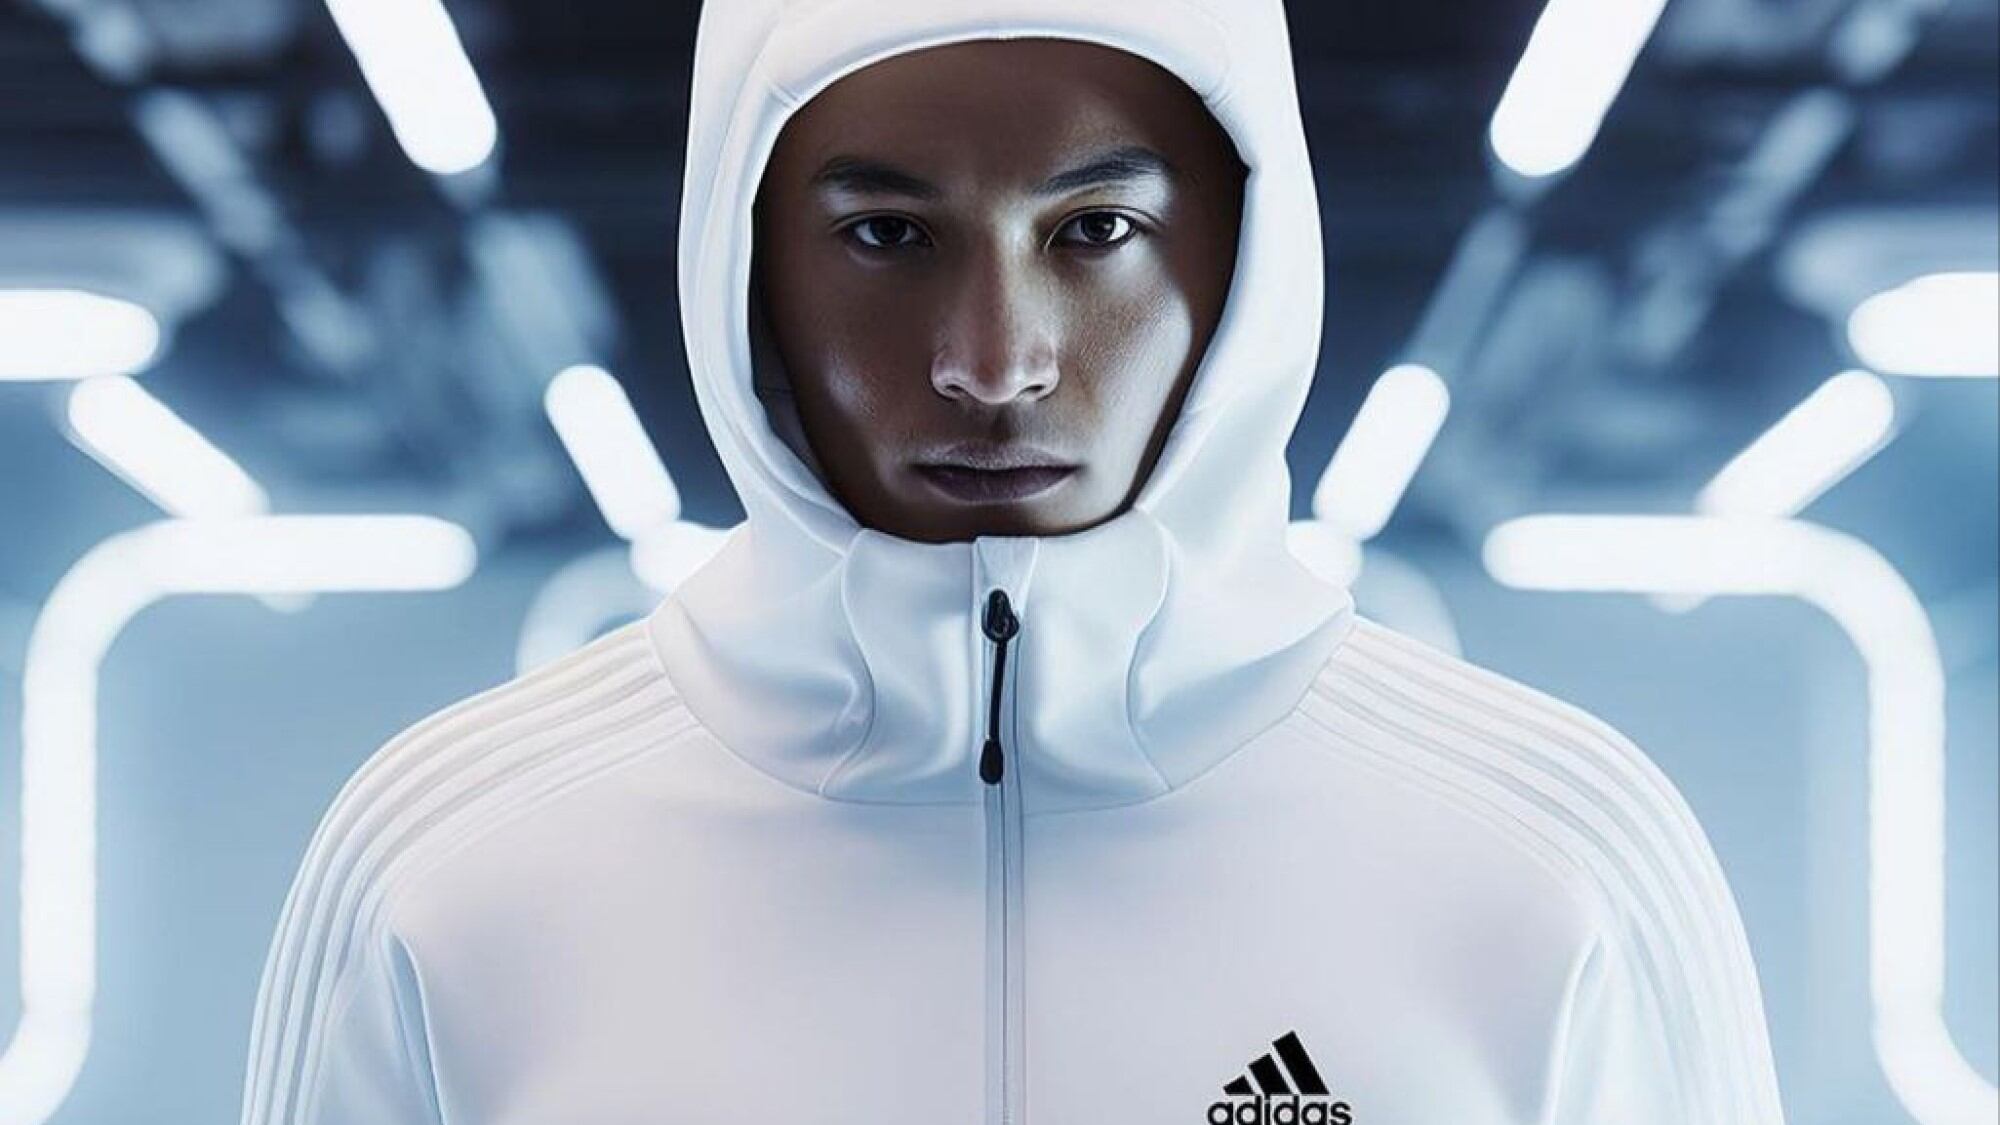 Adidas x SpaceX